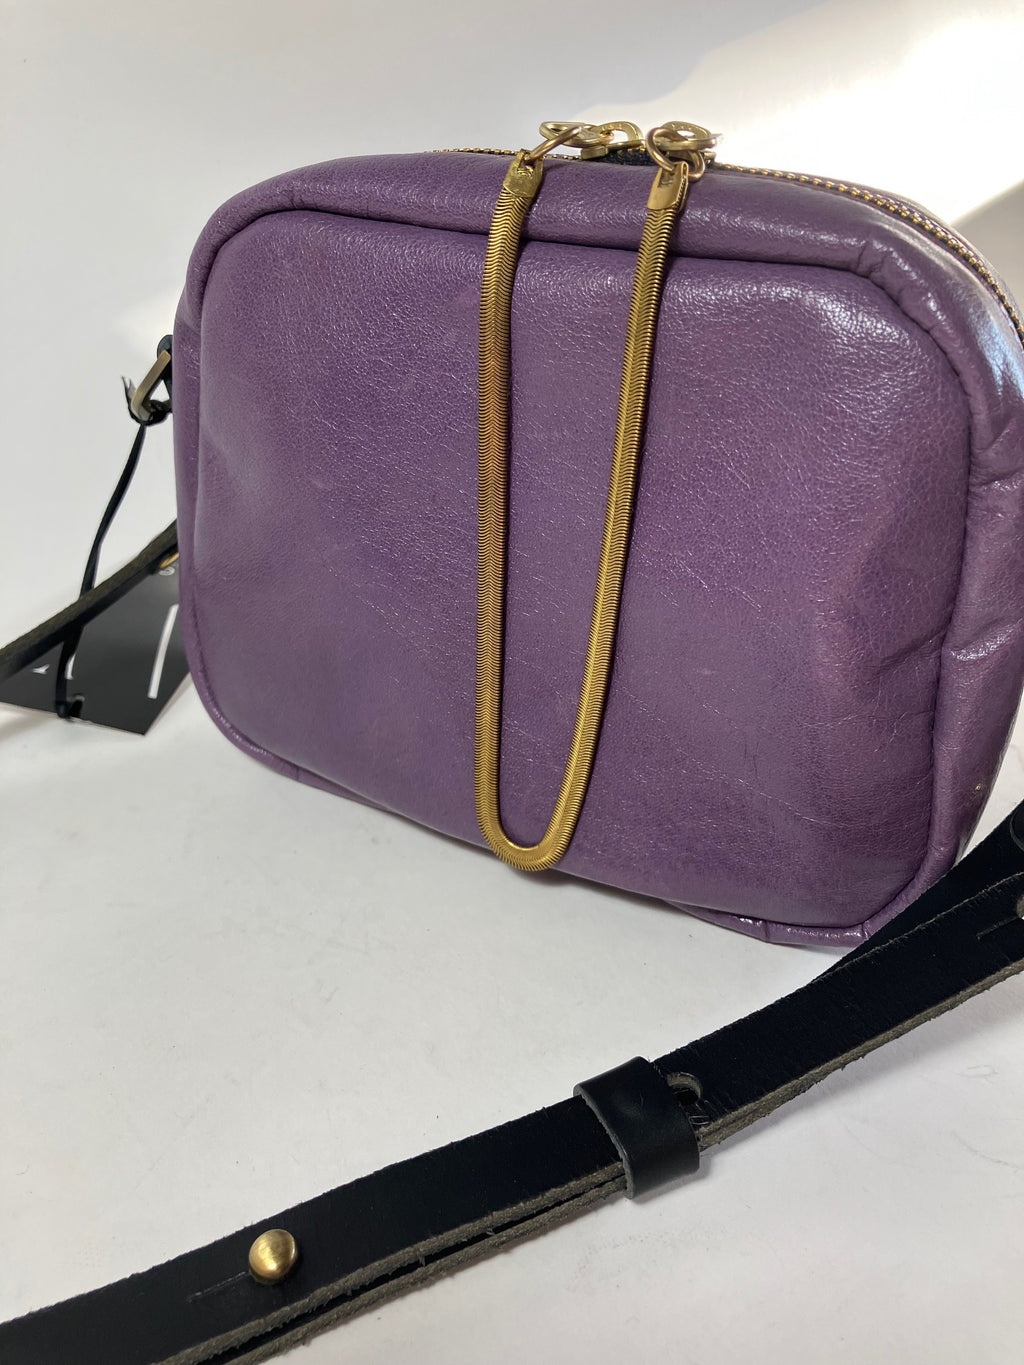 SAMPLE Leather crossbody bag and brass charm orchid color